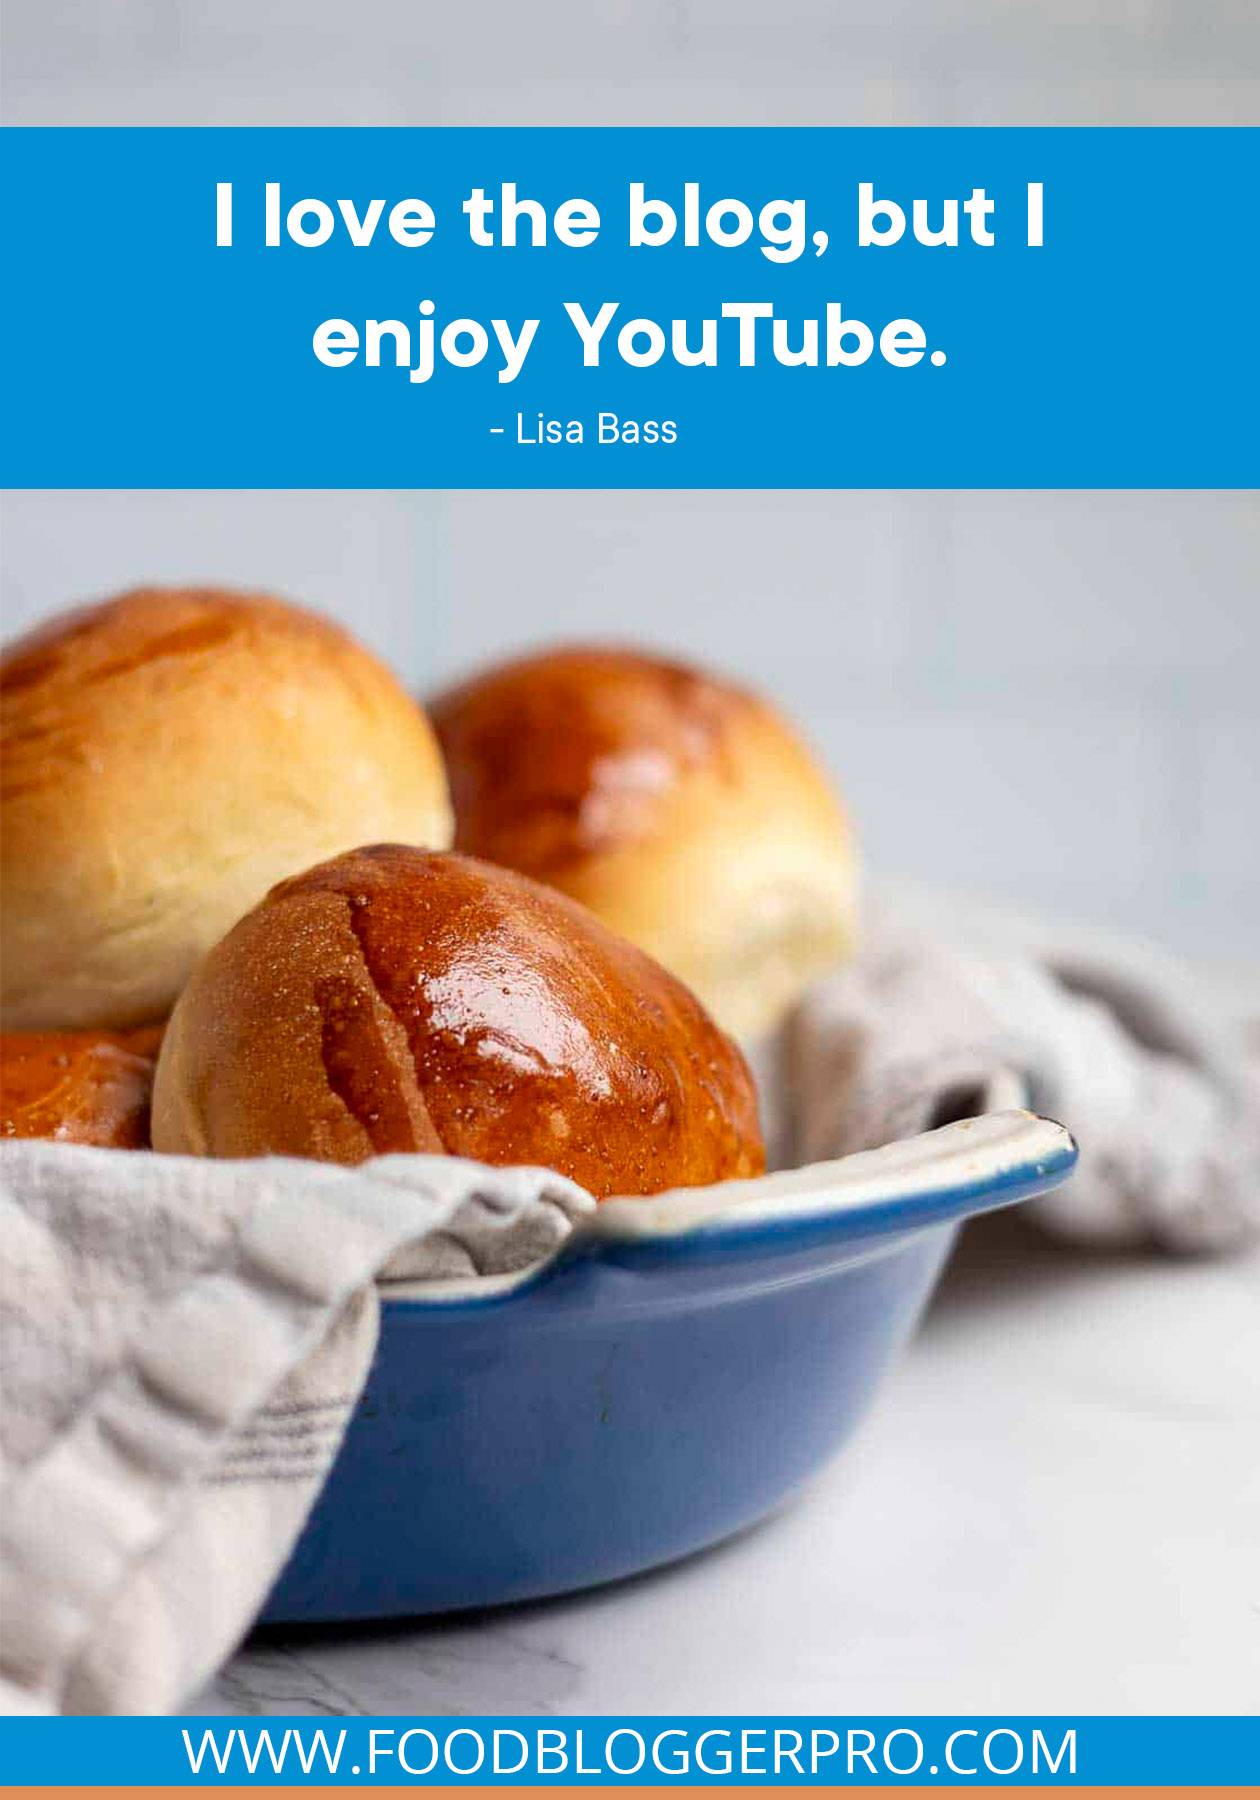 A photograph of bread rolls in a blue dish with a quote from Lisa Bass's episode of The Food Blogger Pro Podcast that reads, "I love the blog, but I enjoy YouTube."